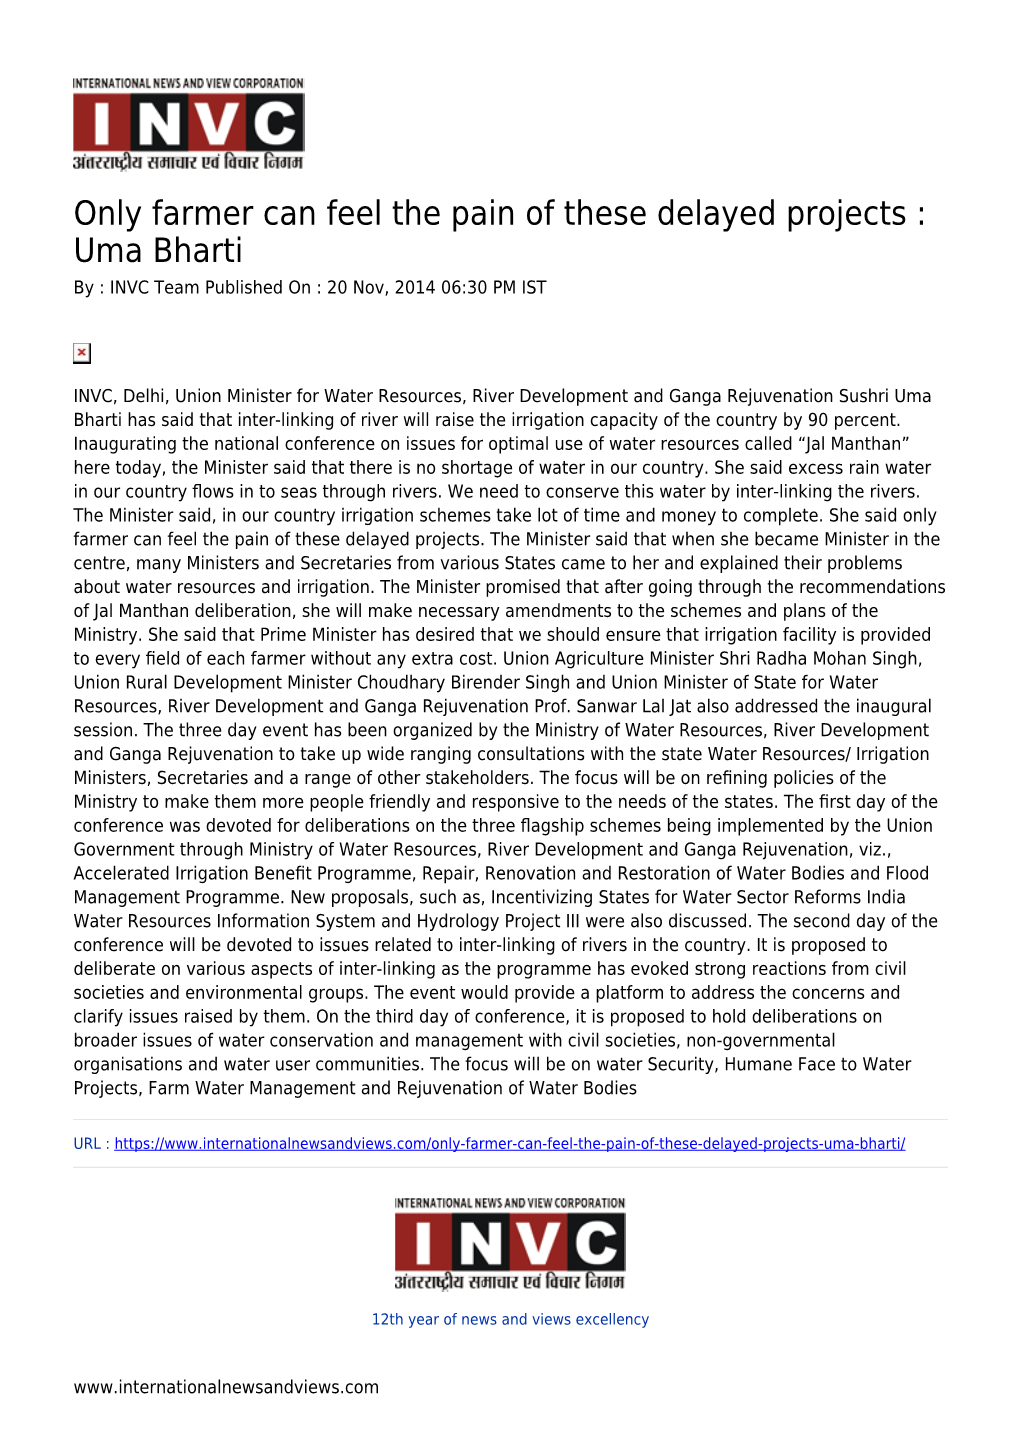 Only Farmer Can Feel the Pain of These Delayed Projects : Uma Bharti by : INVC Team Published on : 20 Nov, 2014 06:30 PM IST